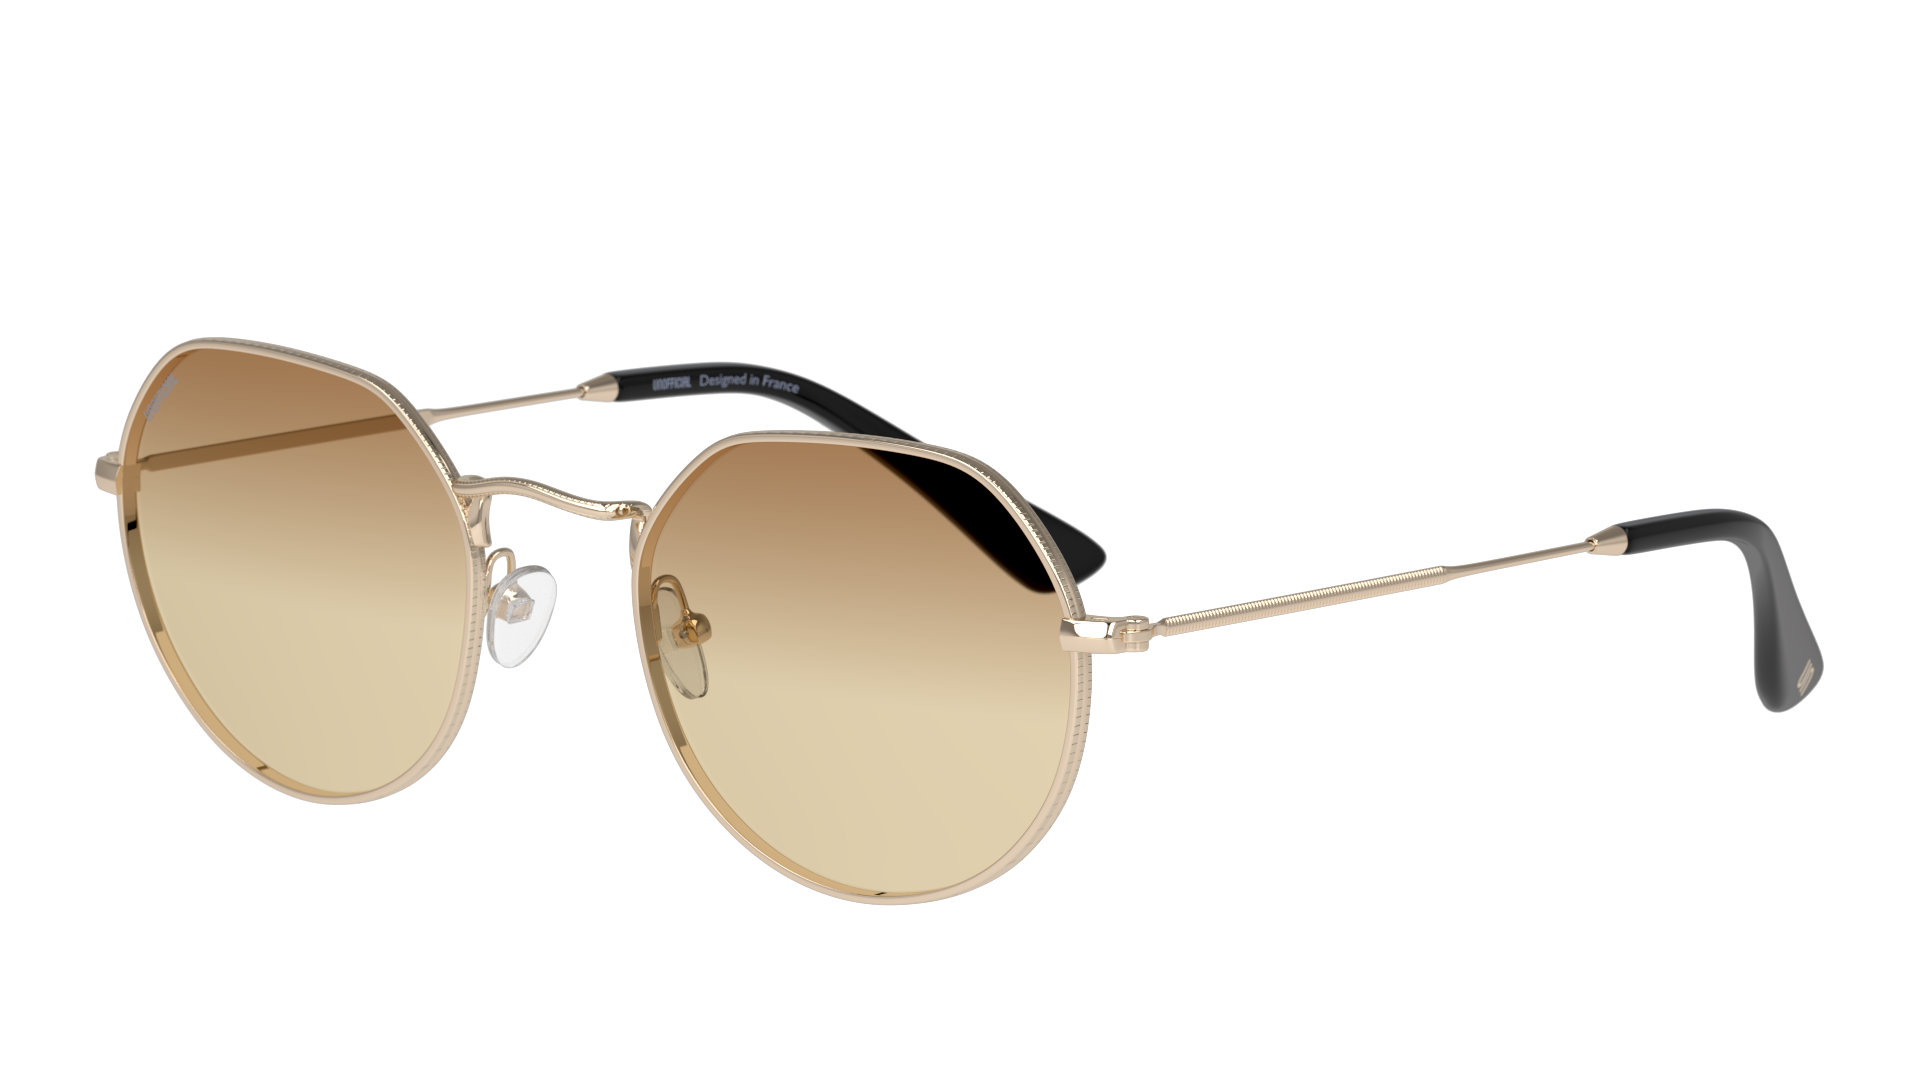 Angle_Left01 Unofficial UNSU0103 (DDN0) Sunglasses Brown / Gold